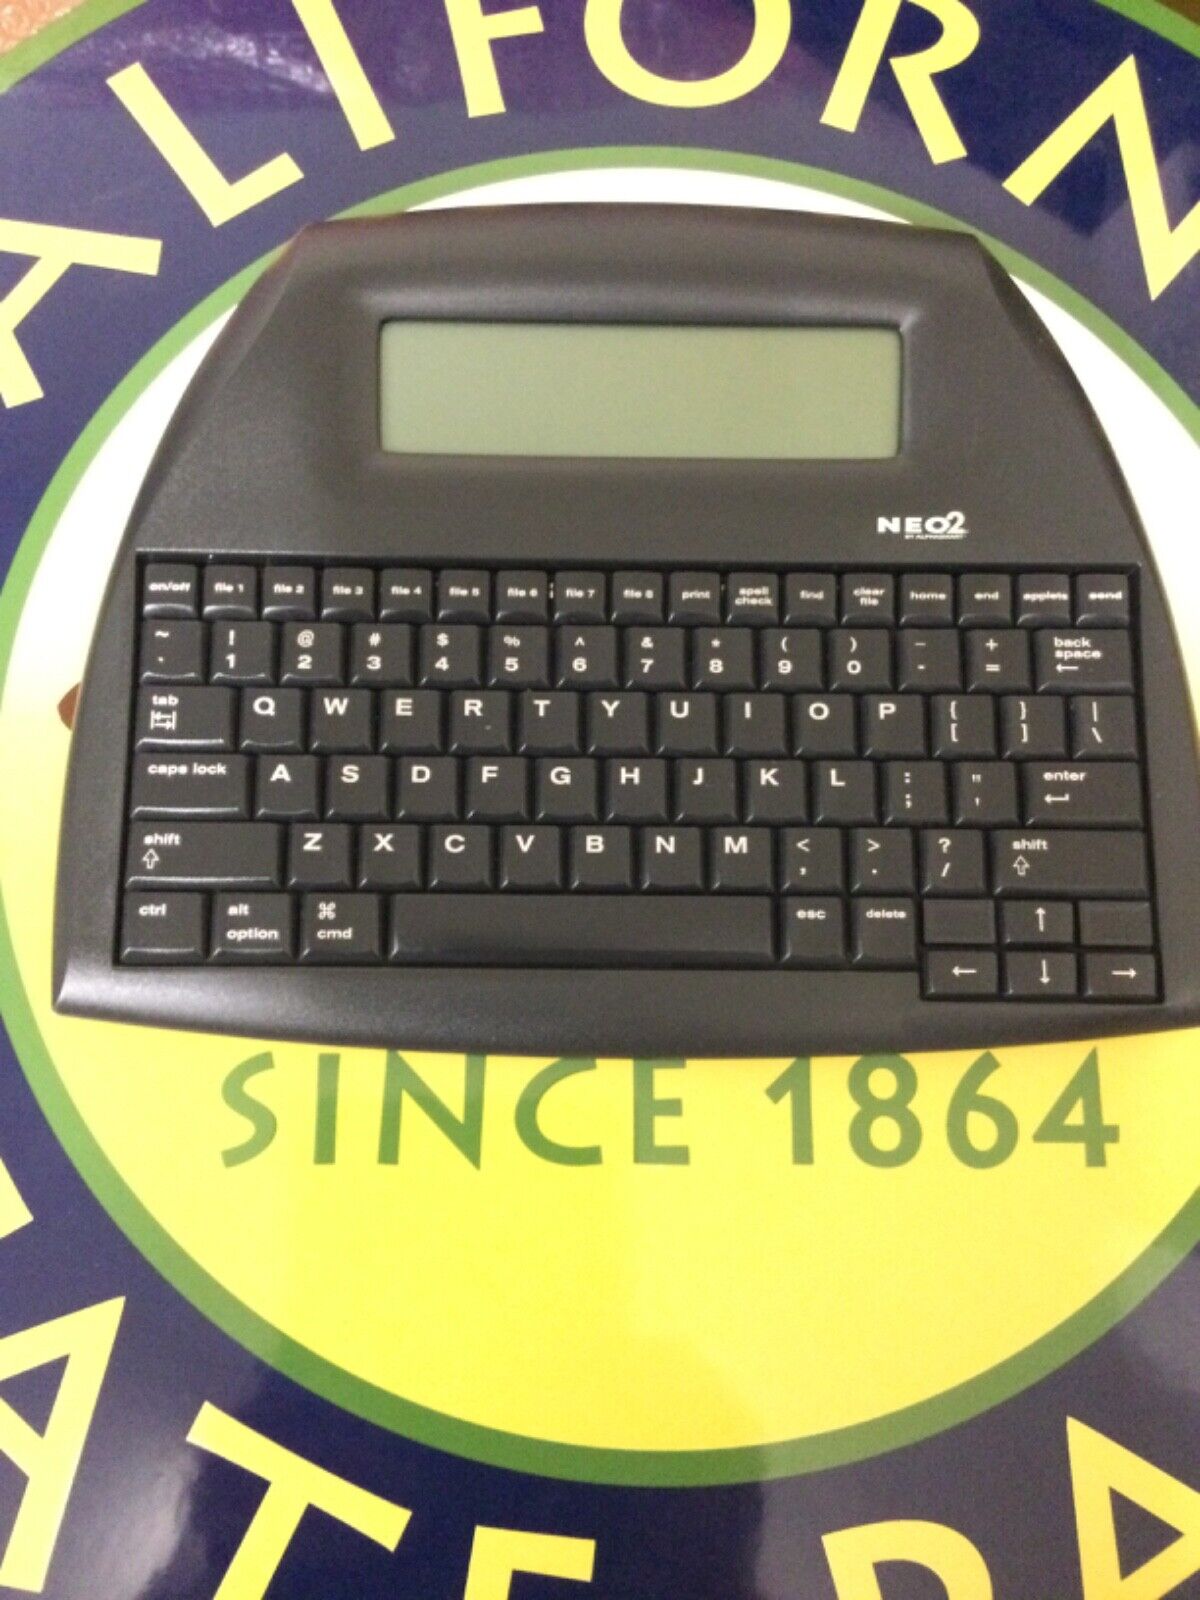 NEW UPDATED 3.15 AlphaSmart NEO 2 Word Processor W/ FRESH BATTERIES & USB CABLE